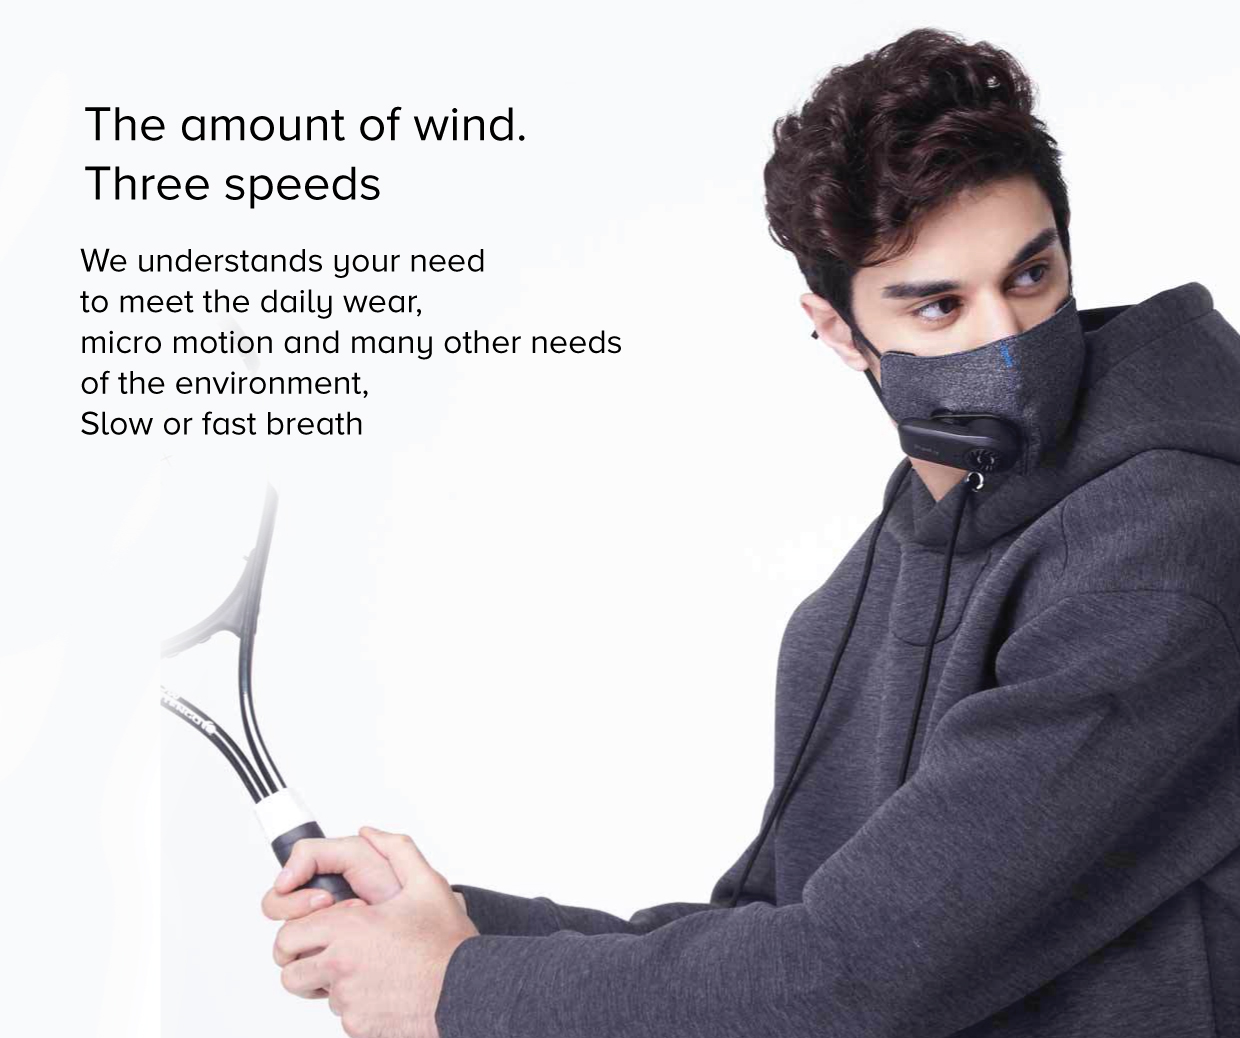 Mi Purely Air Purifying Anti-Pollution Mask